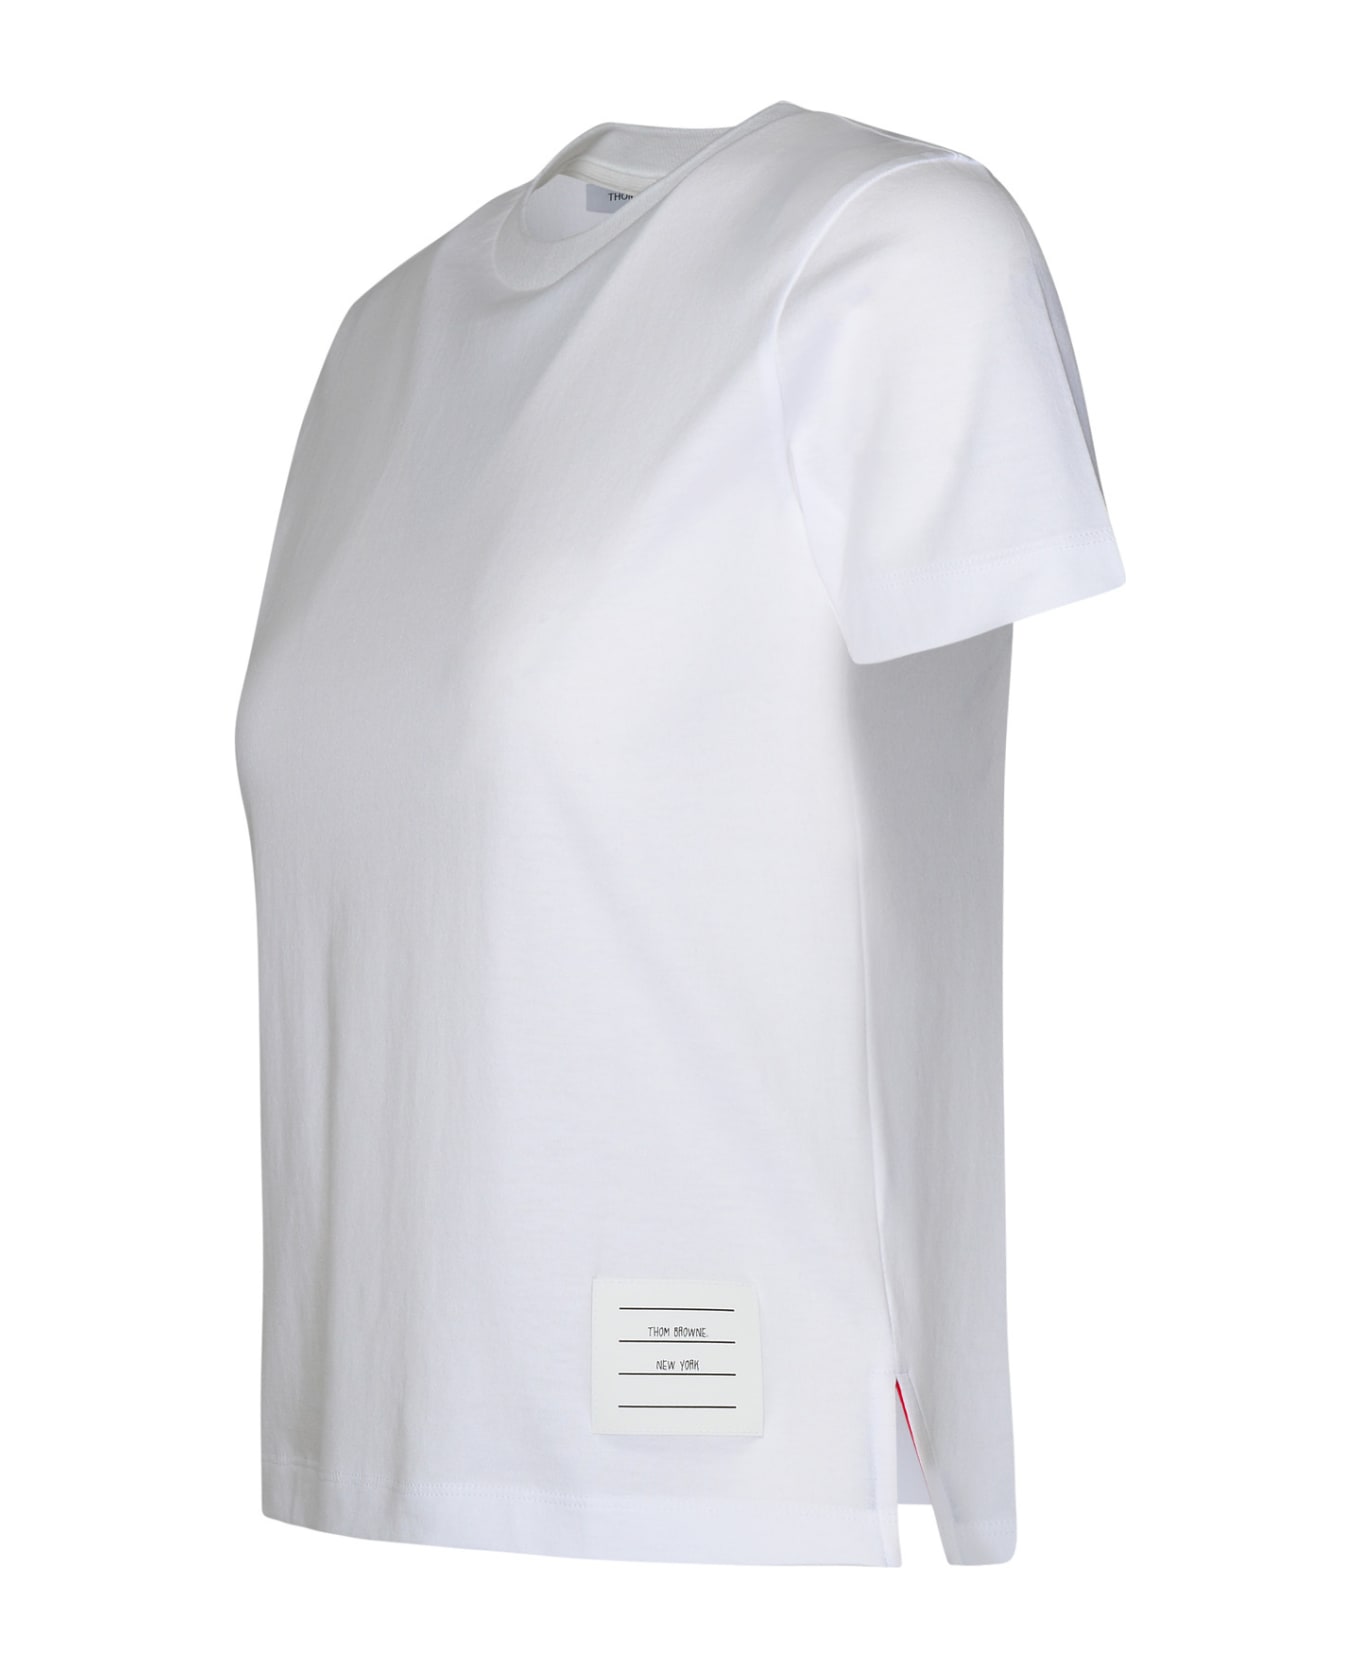 Thom Browne 'relaxed' White Cotton T-shirt - White